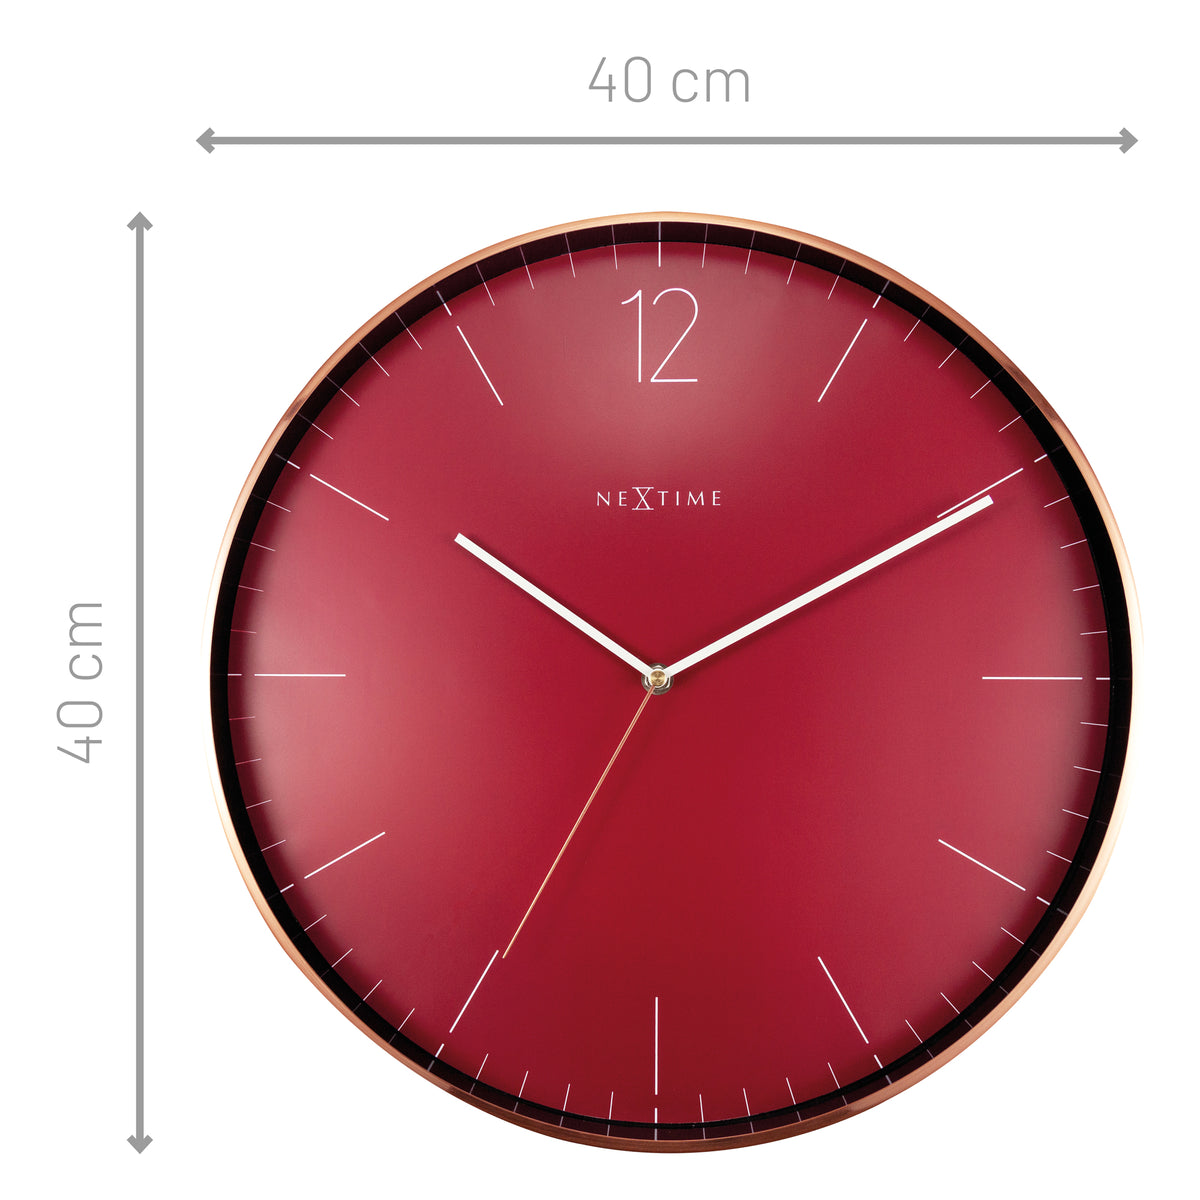 Large Wall Clock - Red  - Silent - Metal/Glass - 40 cm -Essential Copper XXL - NeXtime